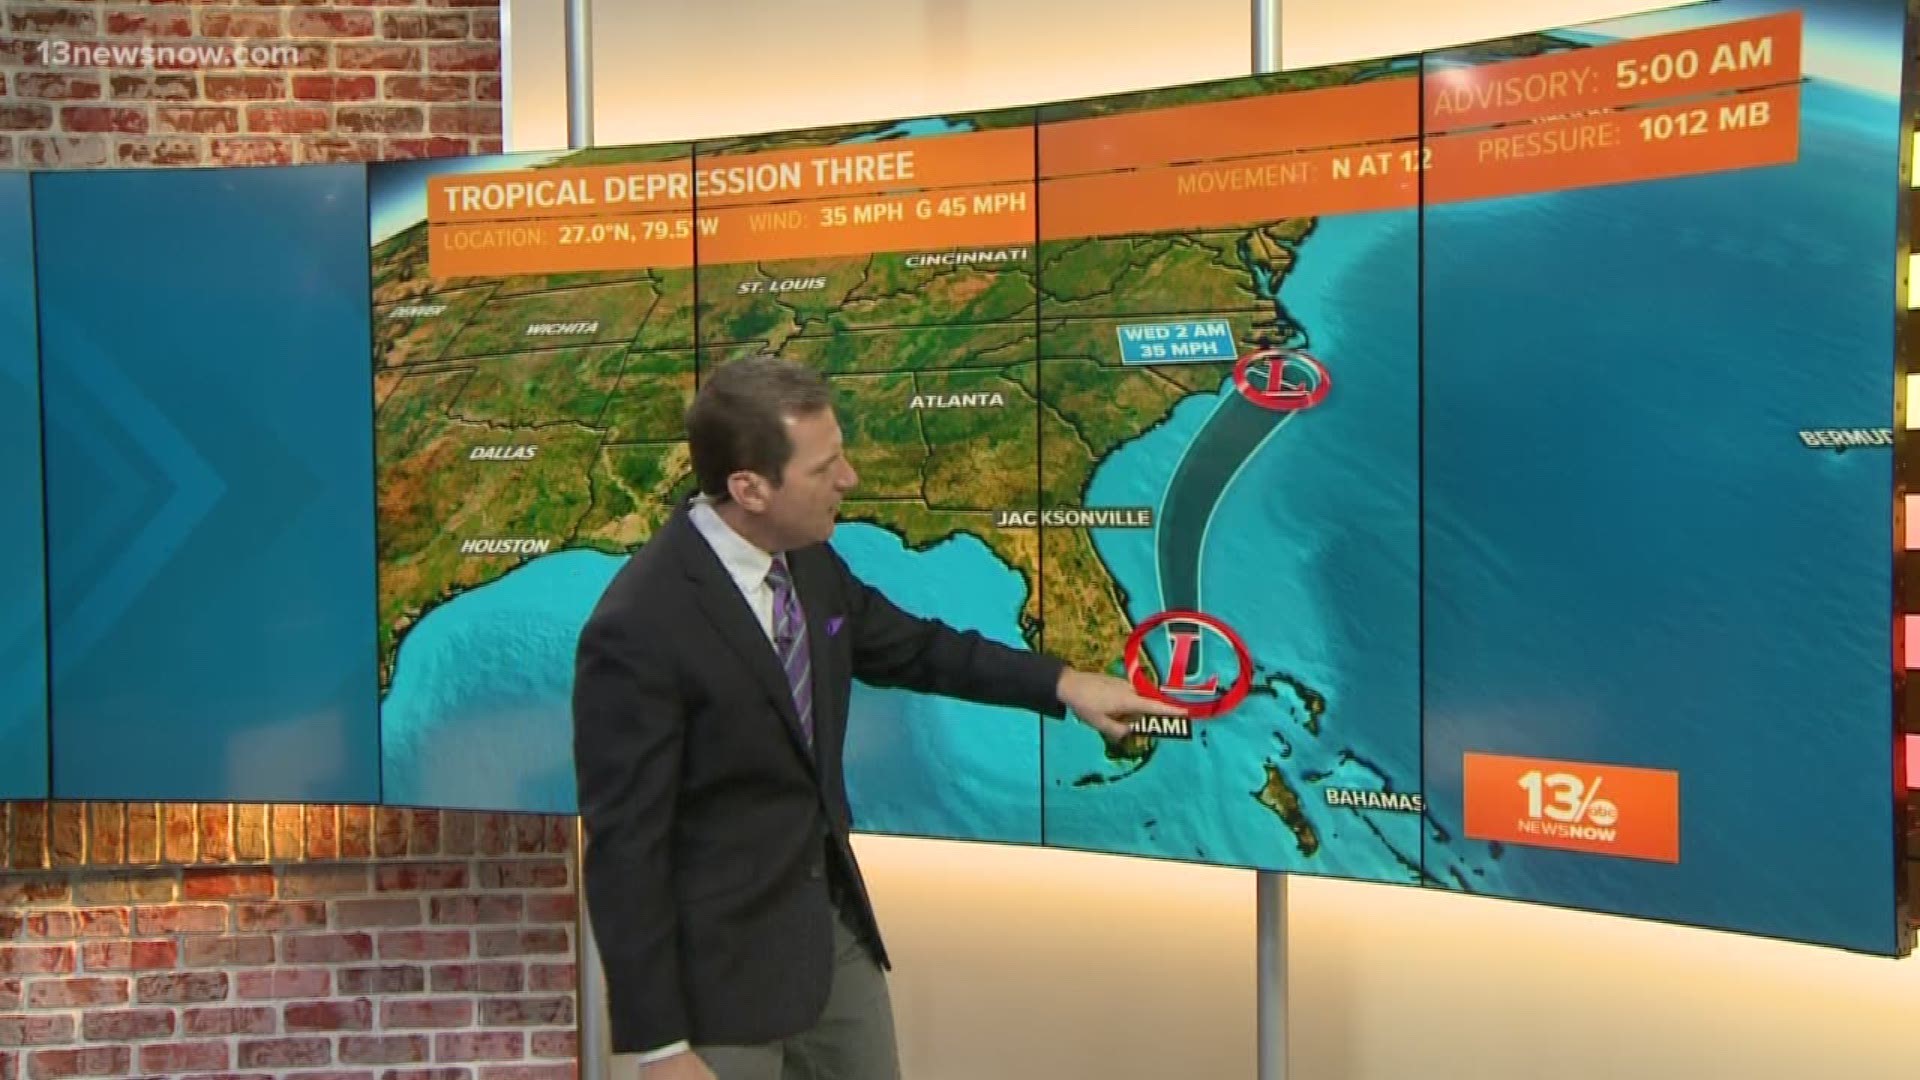 Stormy weather in Hampton Roads today is bringing in a cold front that will push Tropical Depression 3 away from the Carolina and Hampton Roads coastline.